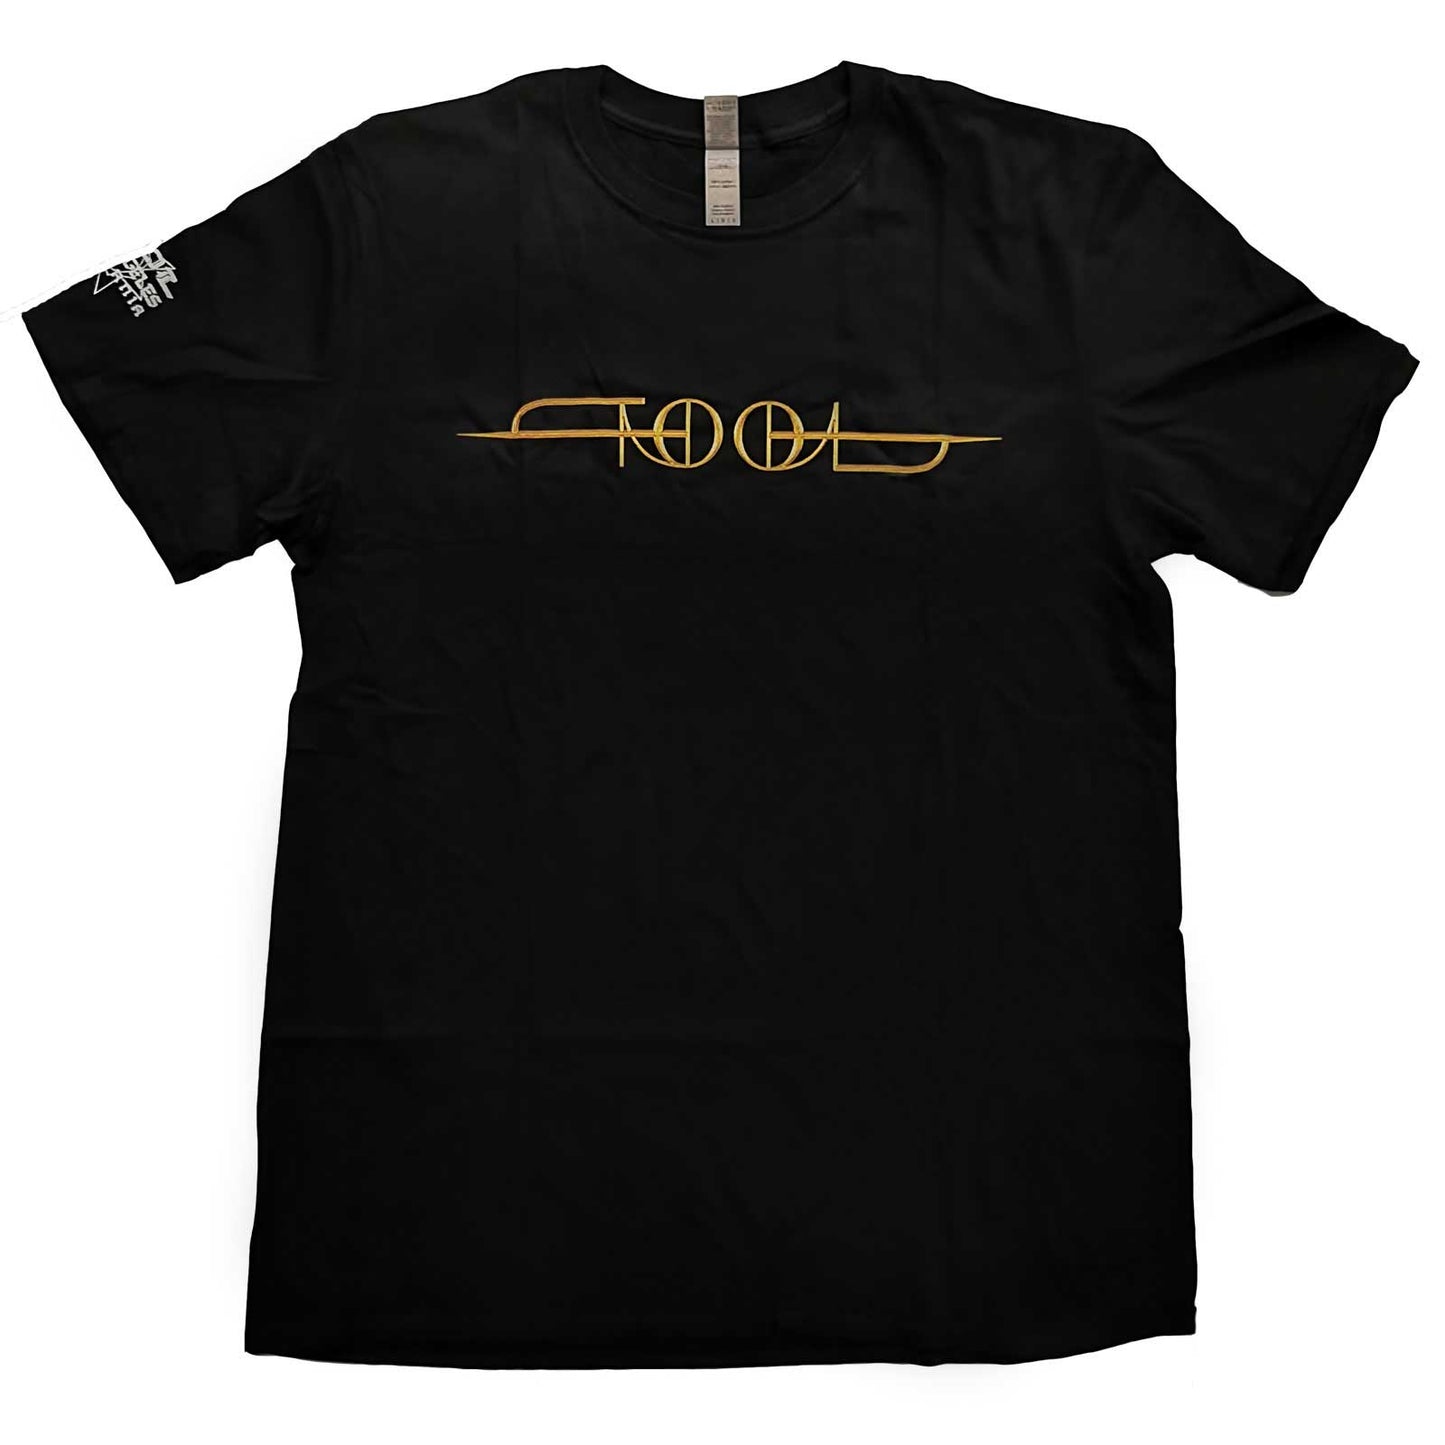 TOOL UNISEX T-SHIRT: THE TORCH